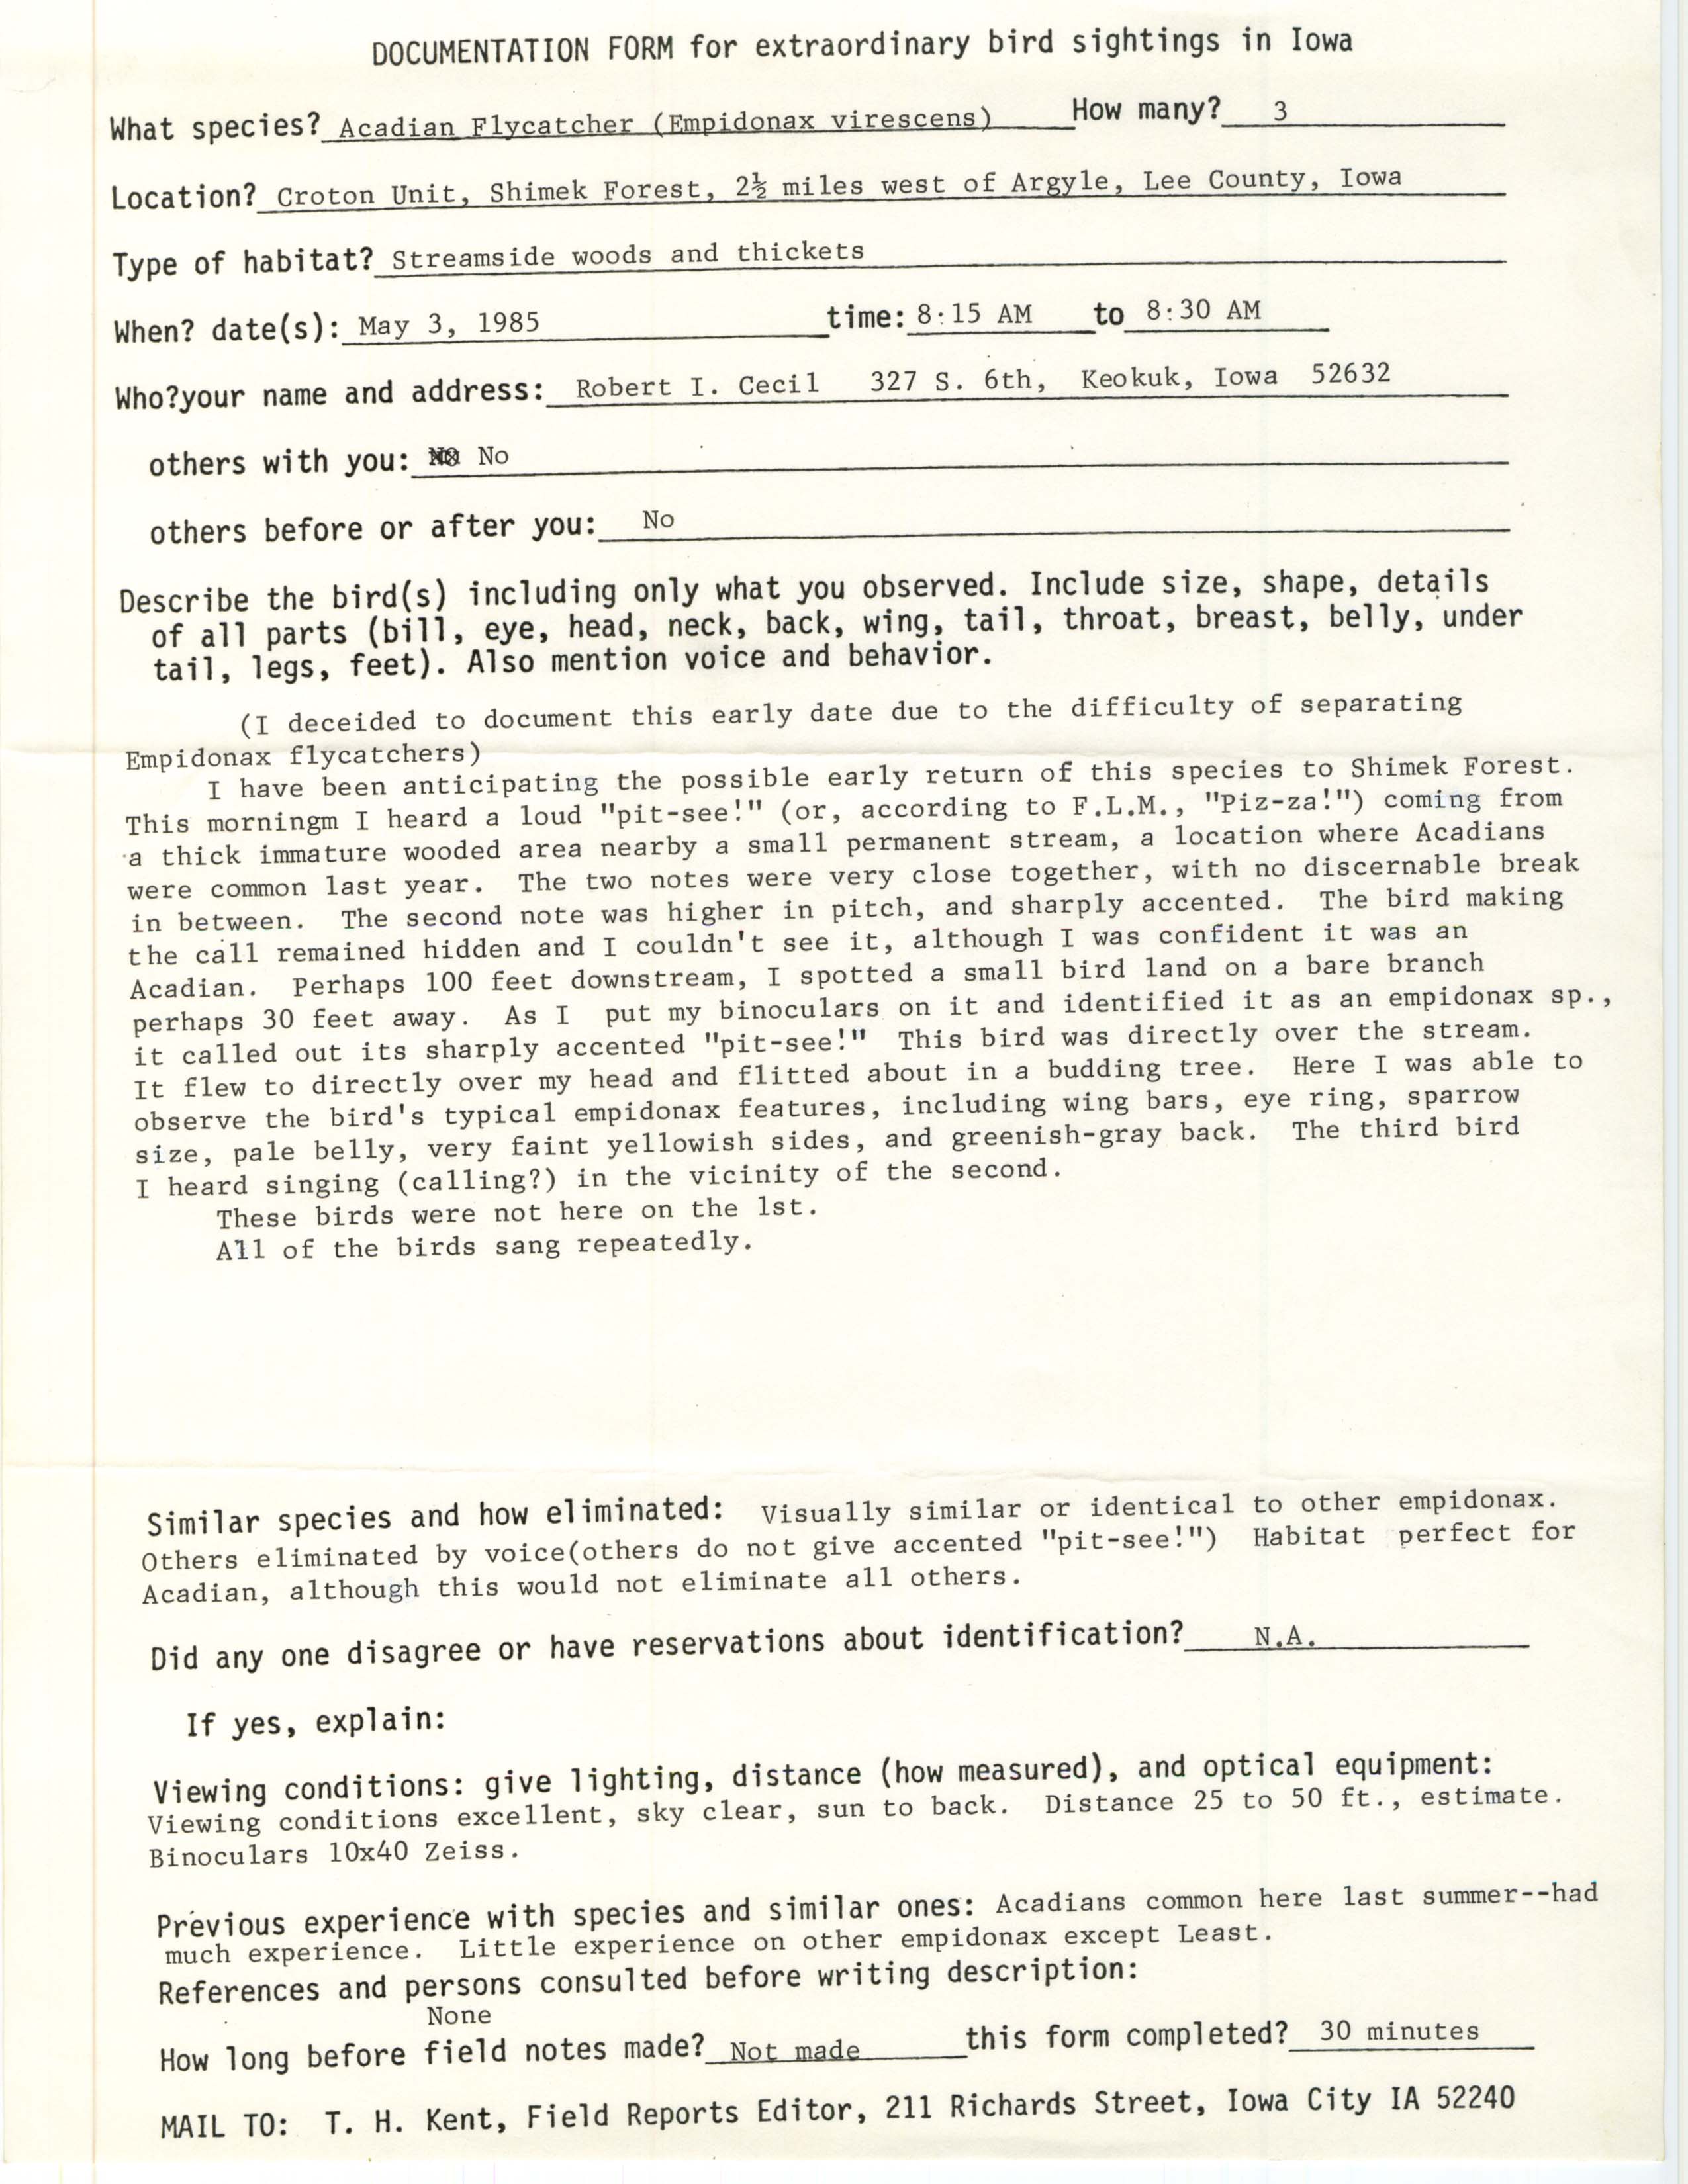 Rare bird documentation form for Acadian Flycatcher at Croton Unit in Shimek State Forest, 1985